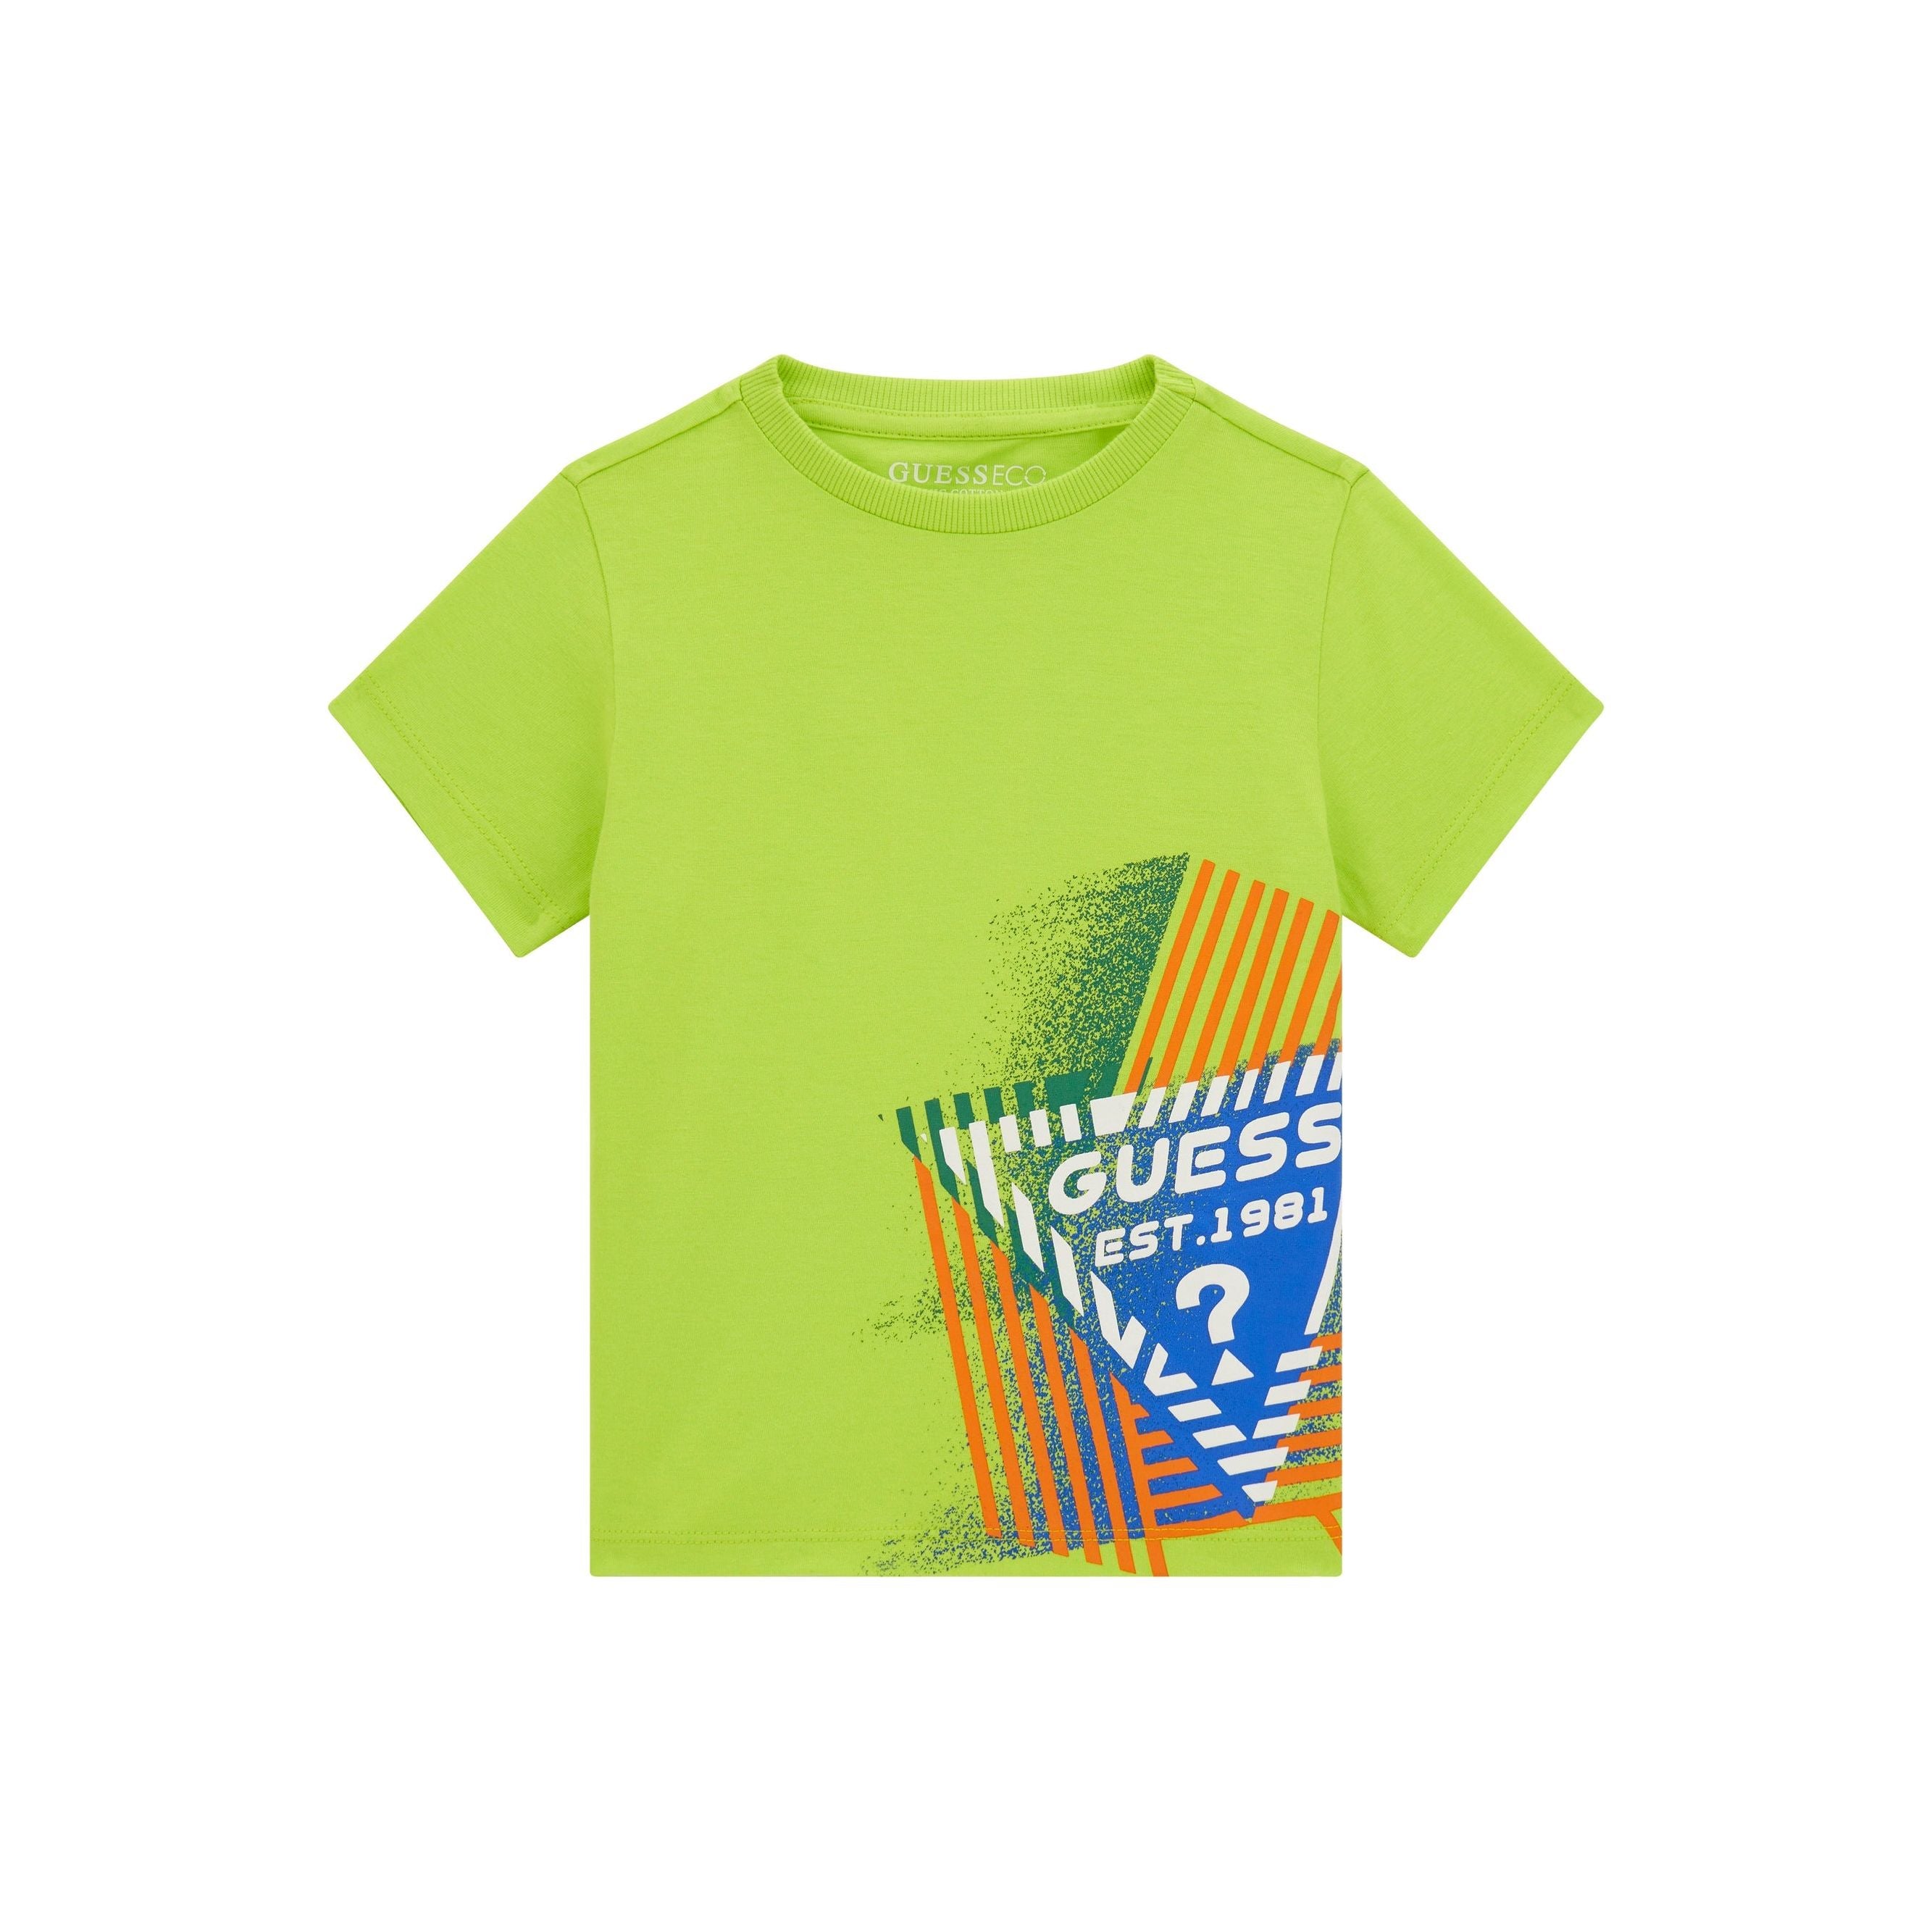 Guess - Toddler Boys Tee in Lime